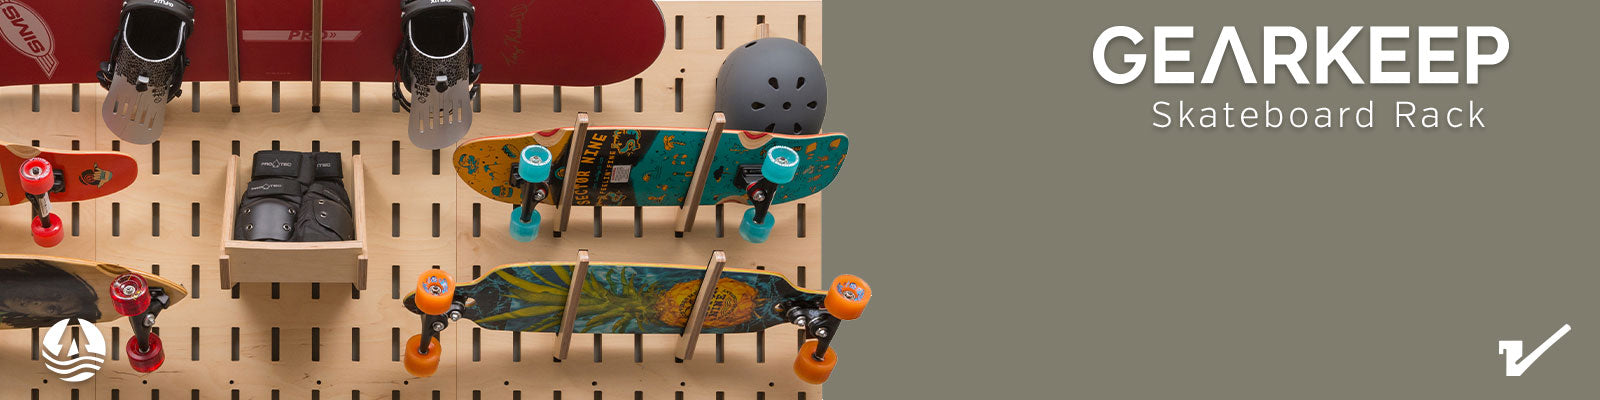 Skateboard rack for home organization or retail store fixture